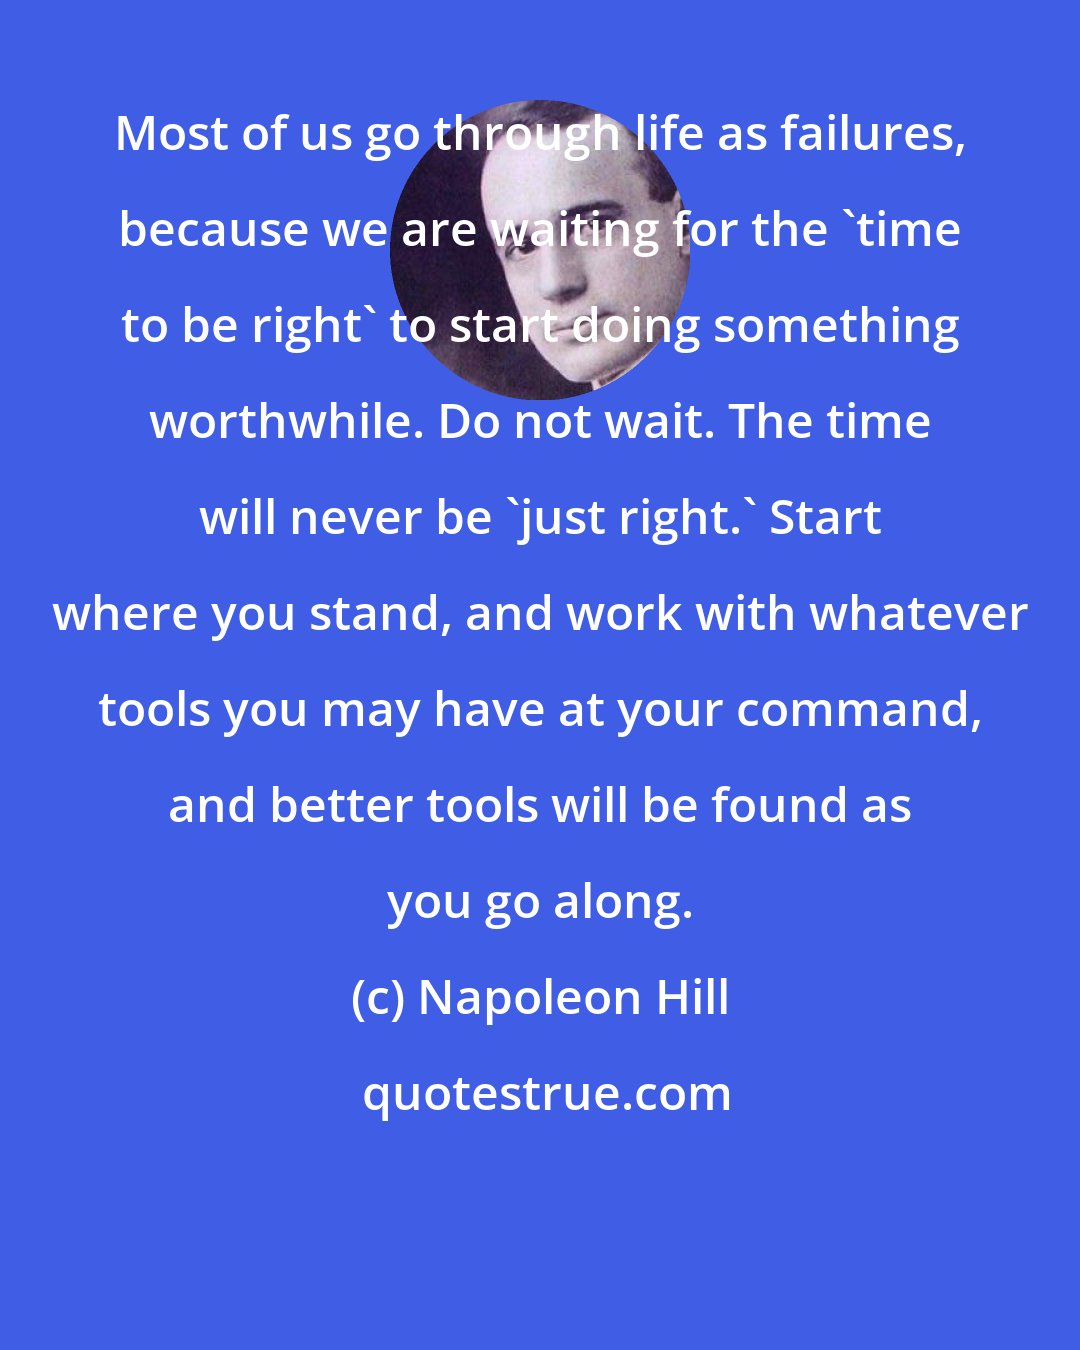 Napoleon Hill: Most of us go through life as failures, because we are waiting for the 'time to be right' to start doing something worthwhile. Do not wait. The time will never be 'just right.' Start where you stand, and work with whatever tools you may have at your command, and better tools will be found as you go along.